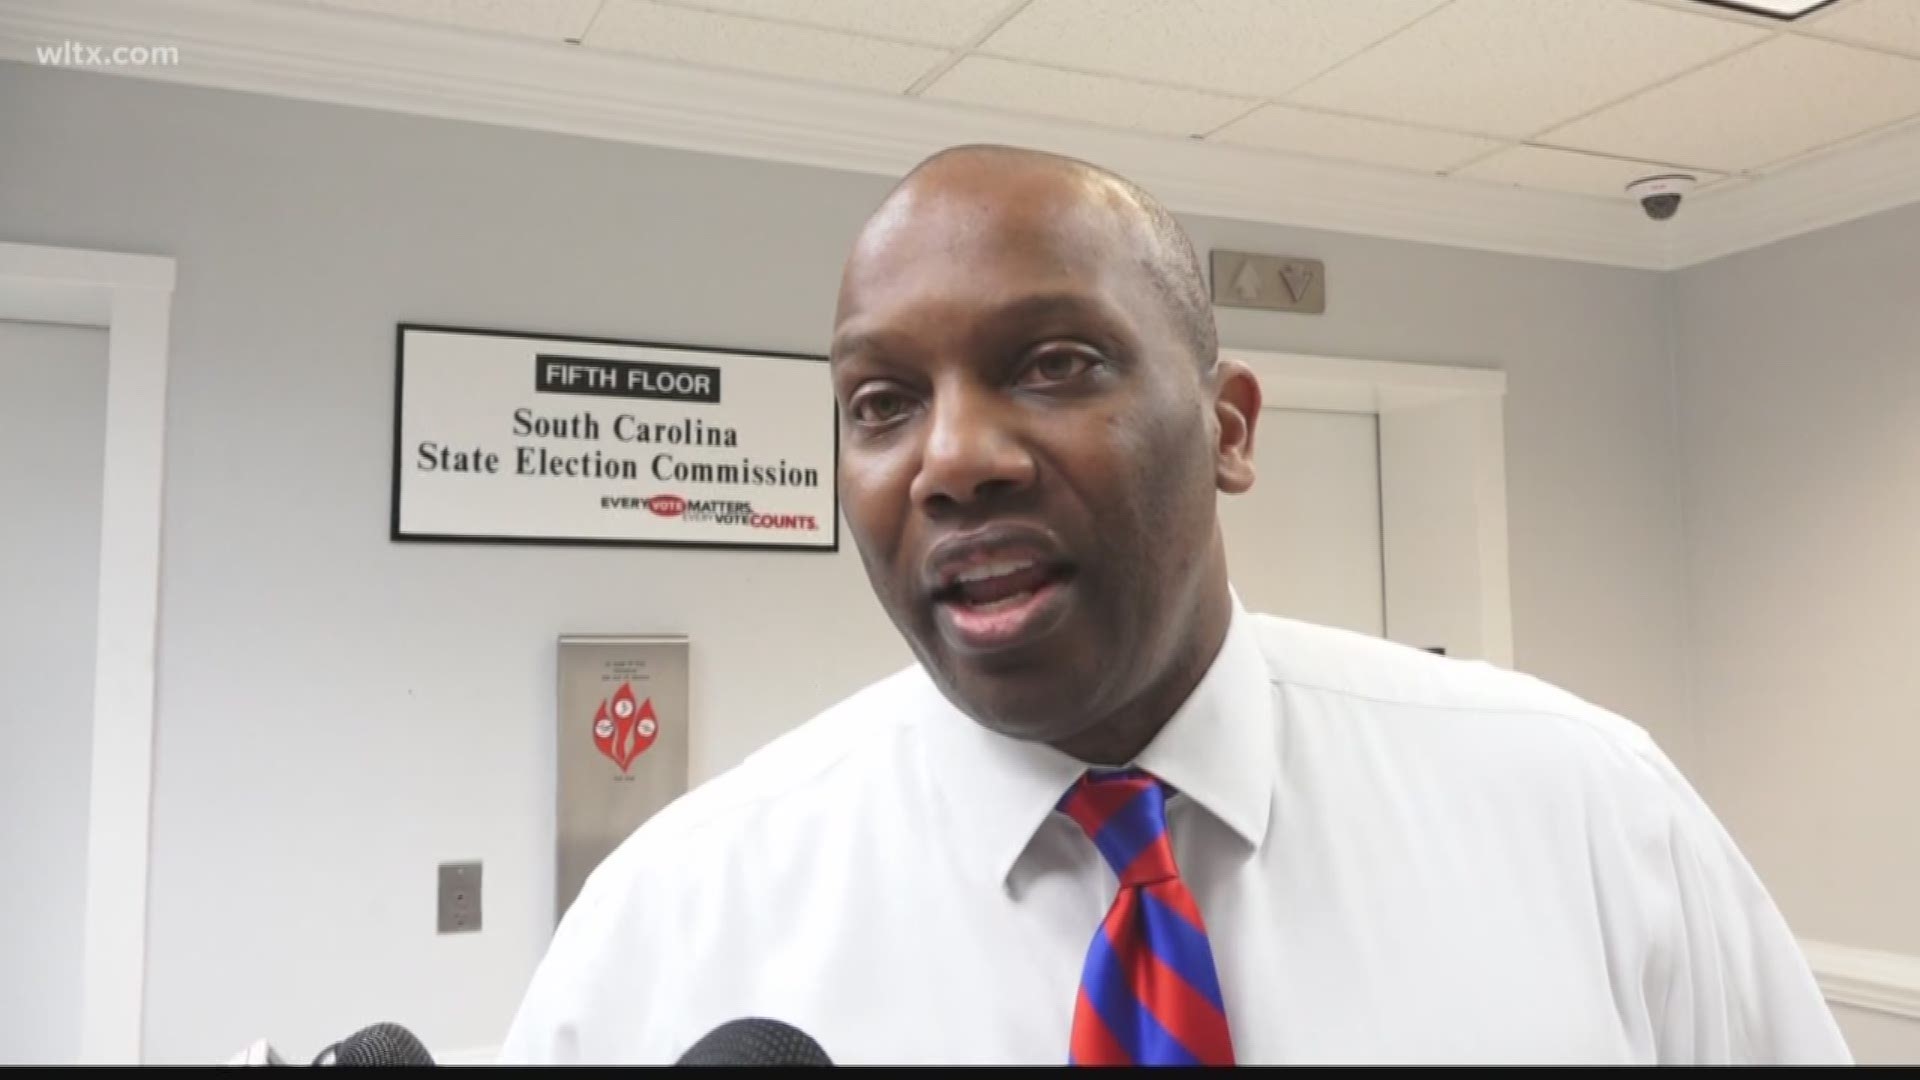 Federal prosecutors on Tuesday announced 26 charges against Fifth Circuit Solicitor Dan Johnson including wire fraud, mail fraud and theft of government funds.